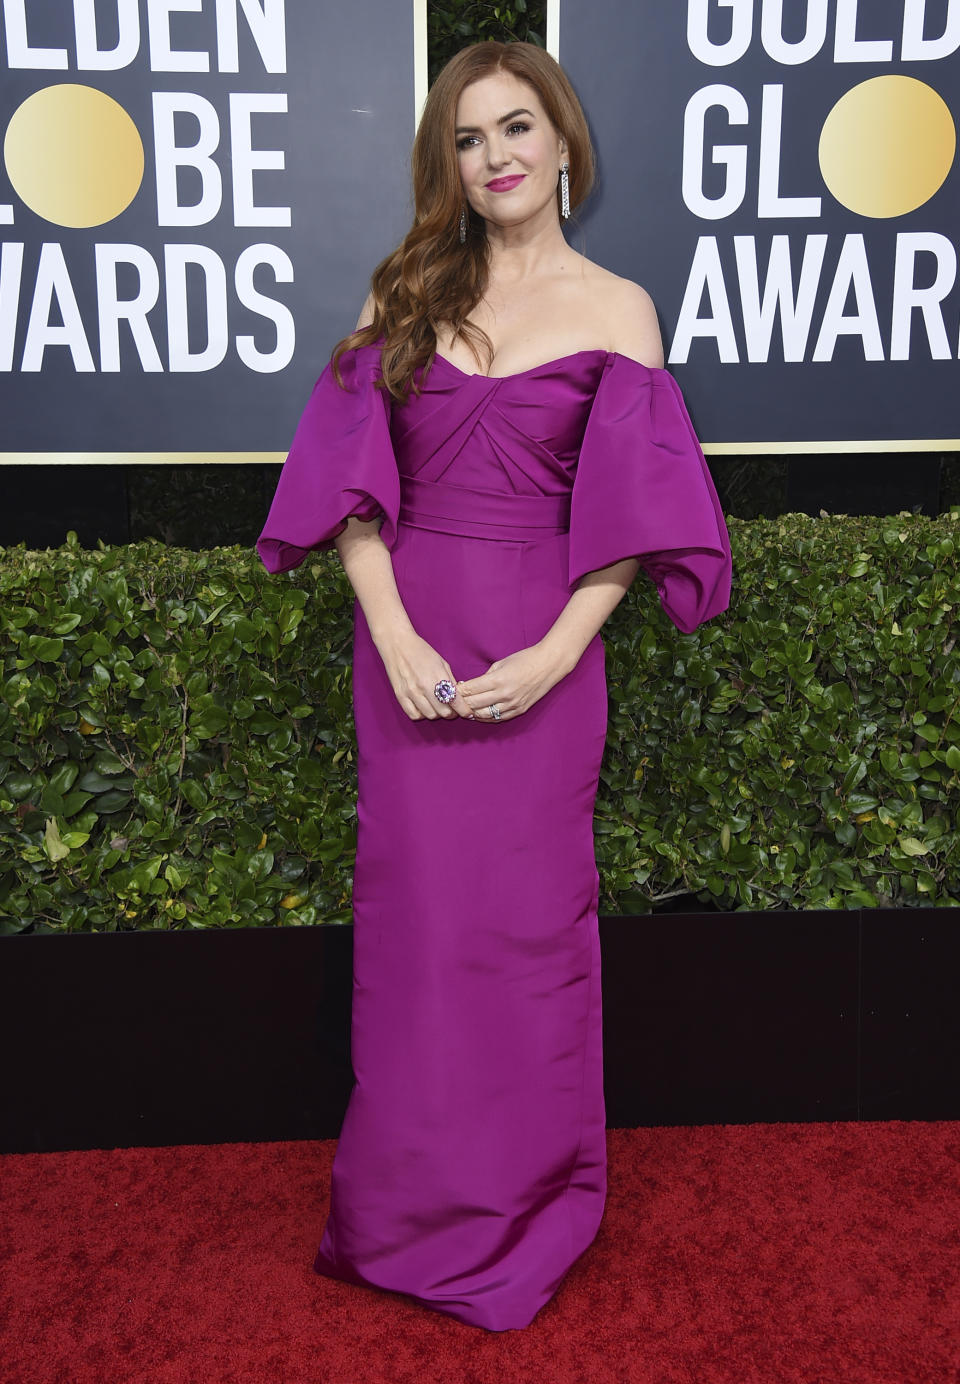 Isla Fisher arrives at the 77th annual Golden Globe Awards at the Beverly Hilton Hotel on Sunday, Jan. 5, 2020, in Beverly Hills, Calif. (Photo by Jordan Strauss/Invision/AP)